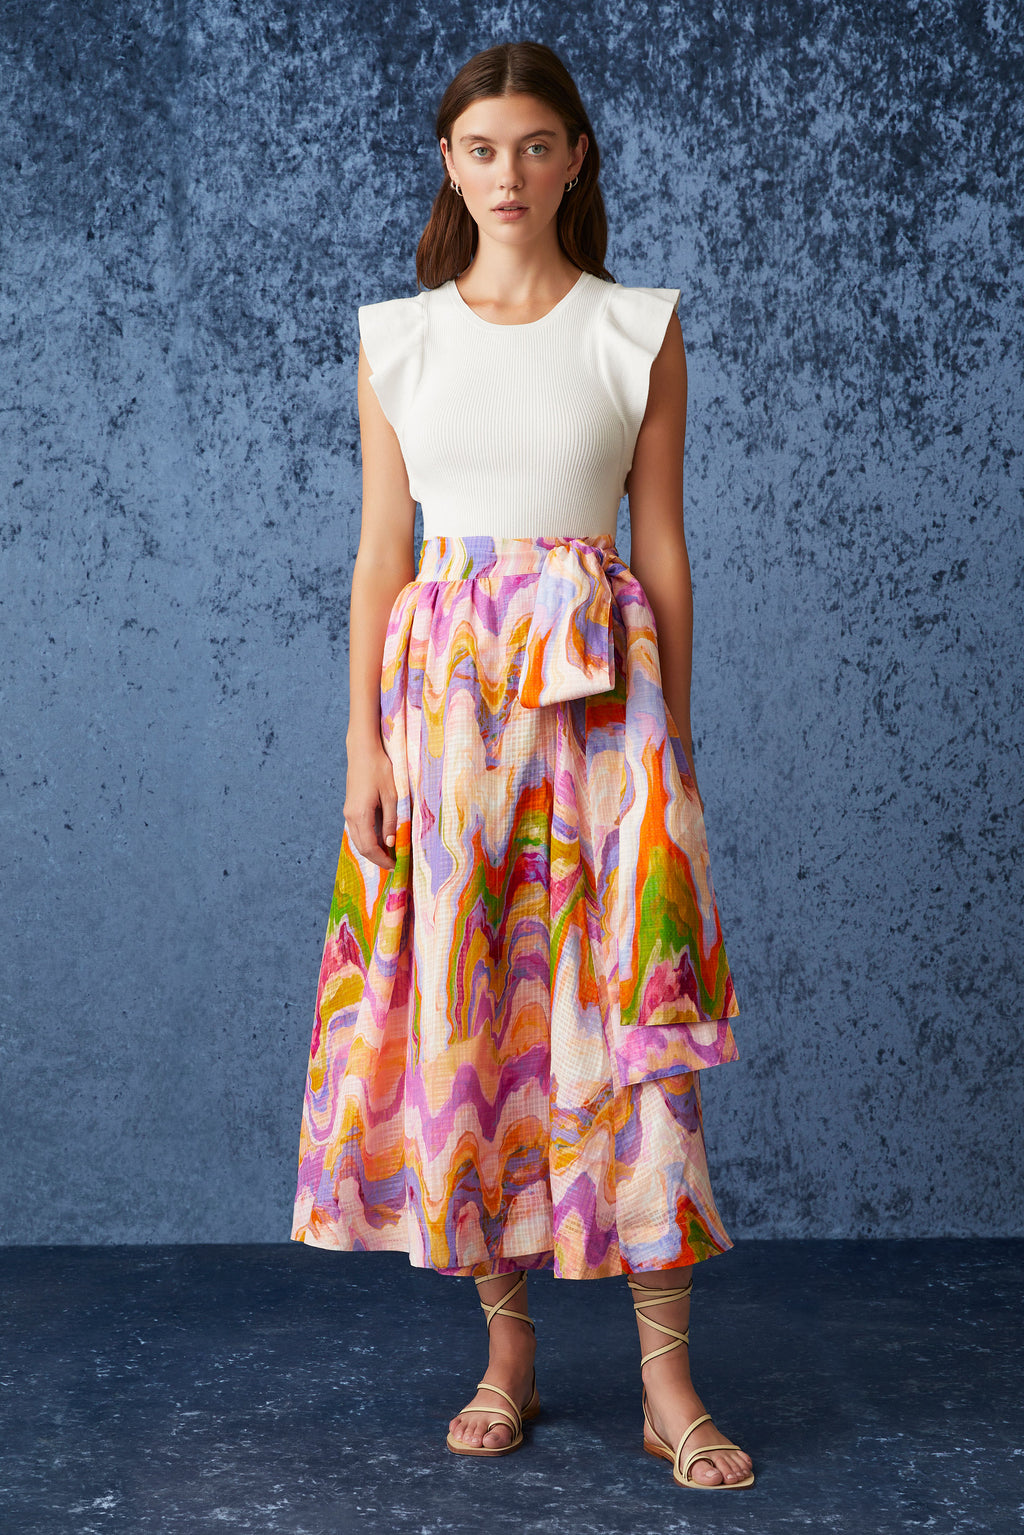 Traditional wrap skirt with long tie belt at the waist in a pink pastel marble like print 